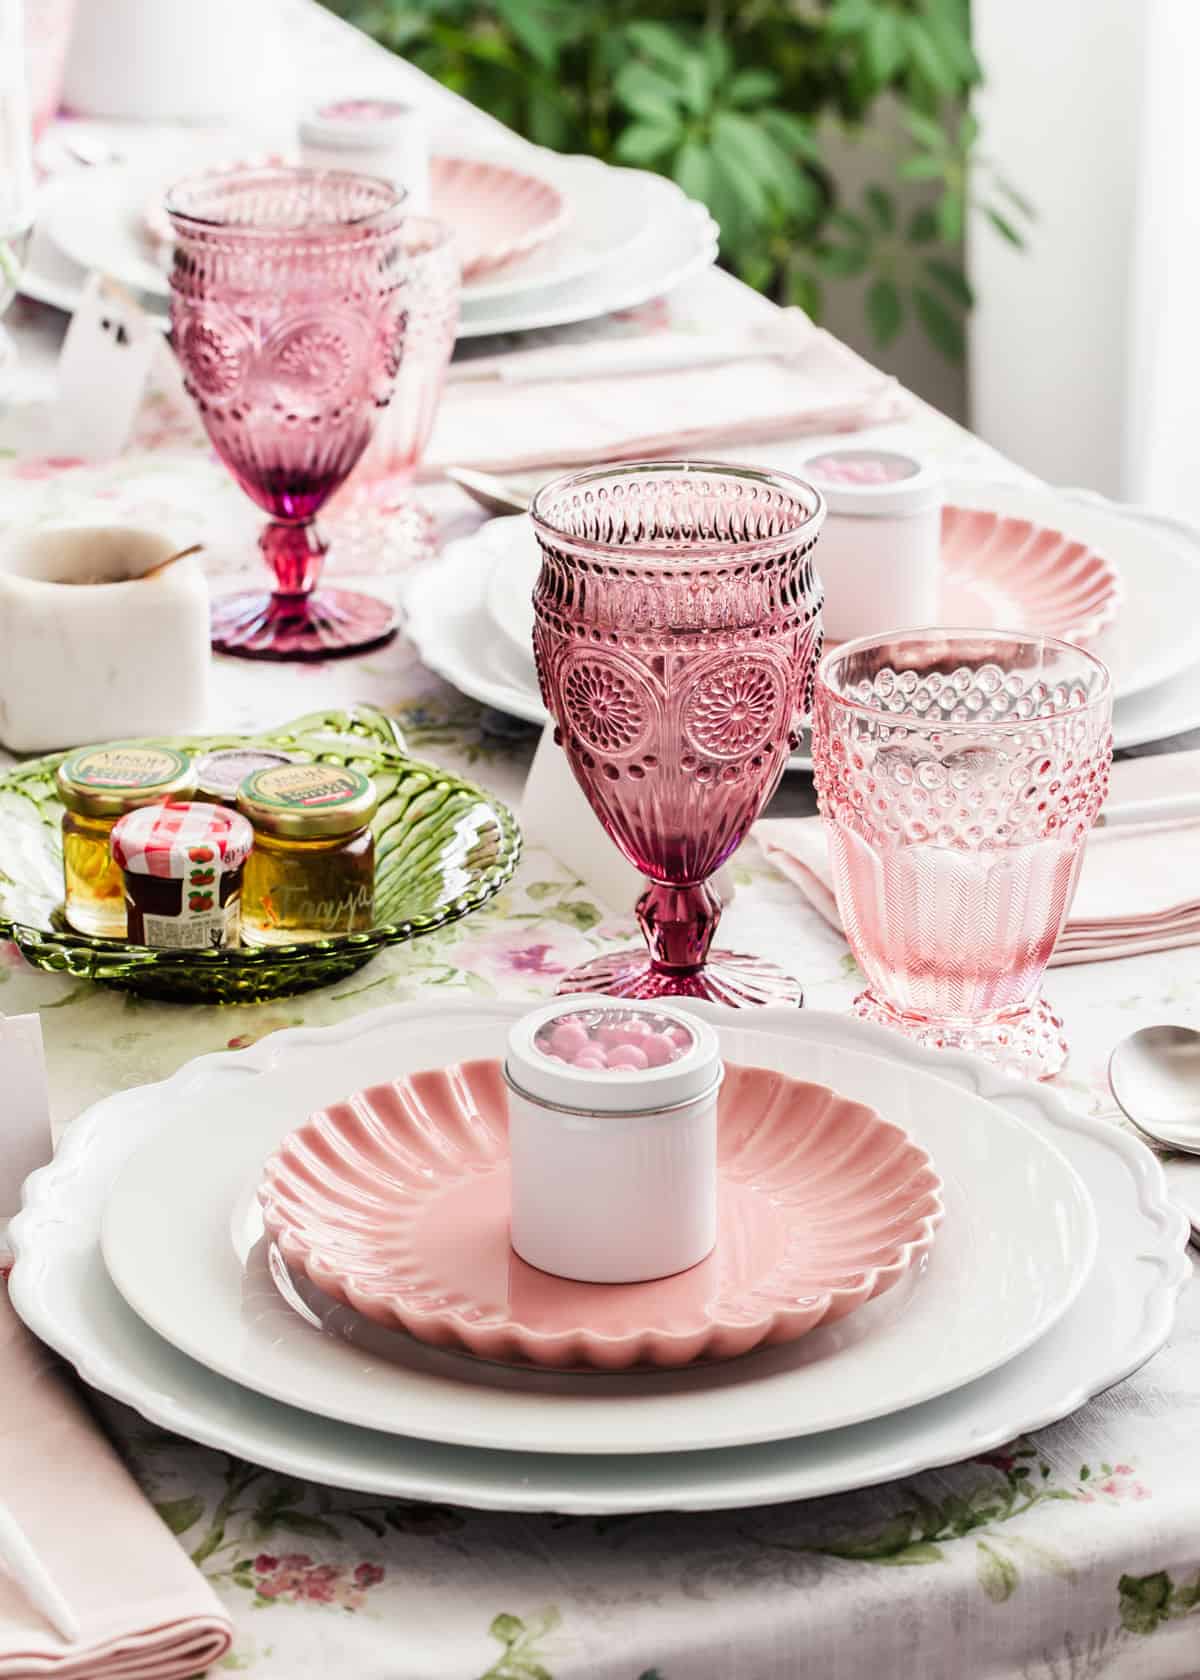 pink and white spring place setting with pink plate on top of white plate and charger and pink glasses and napkins.